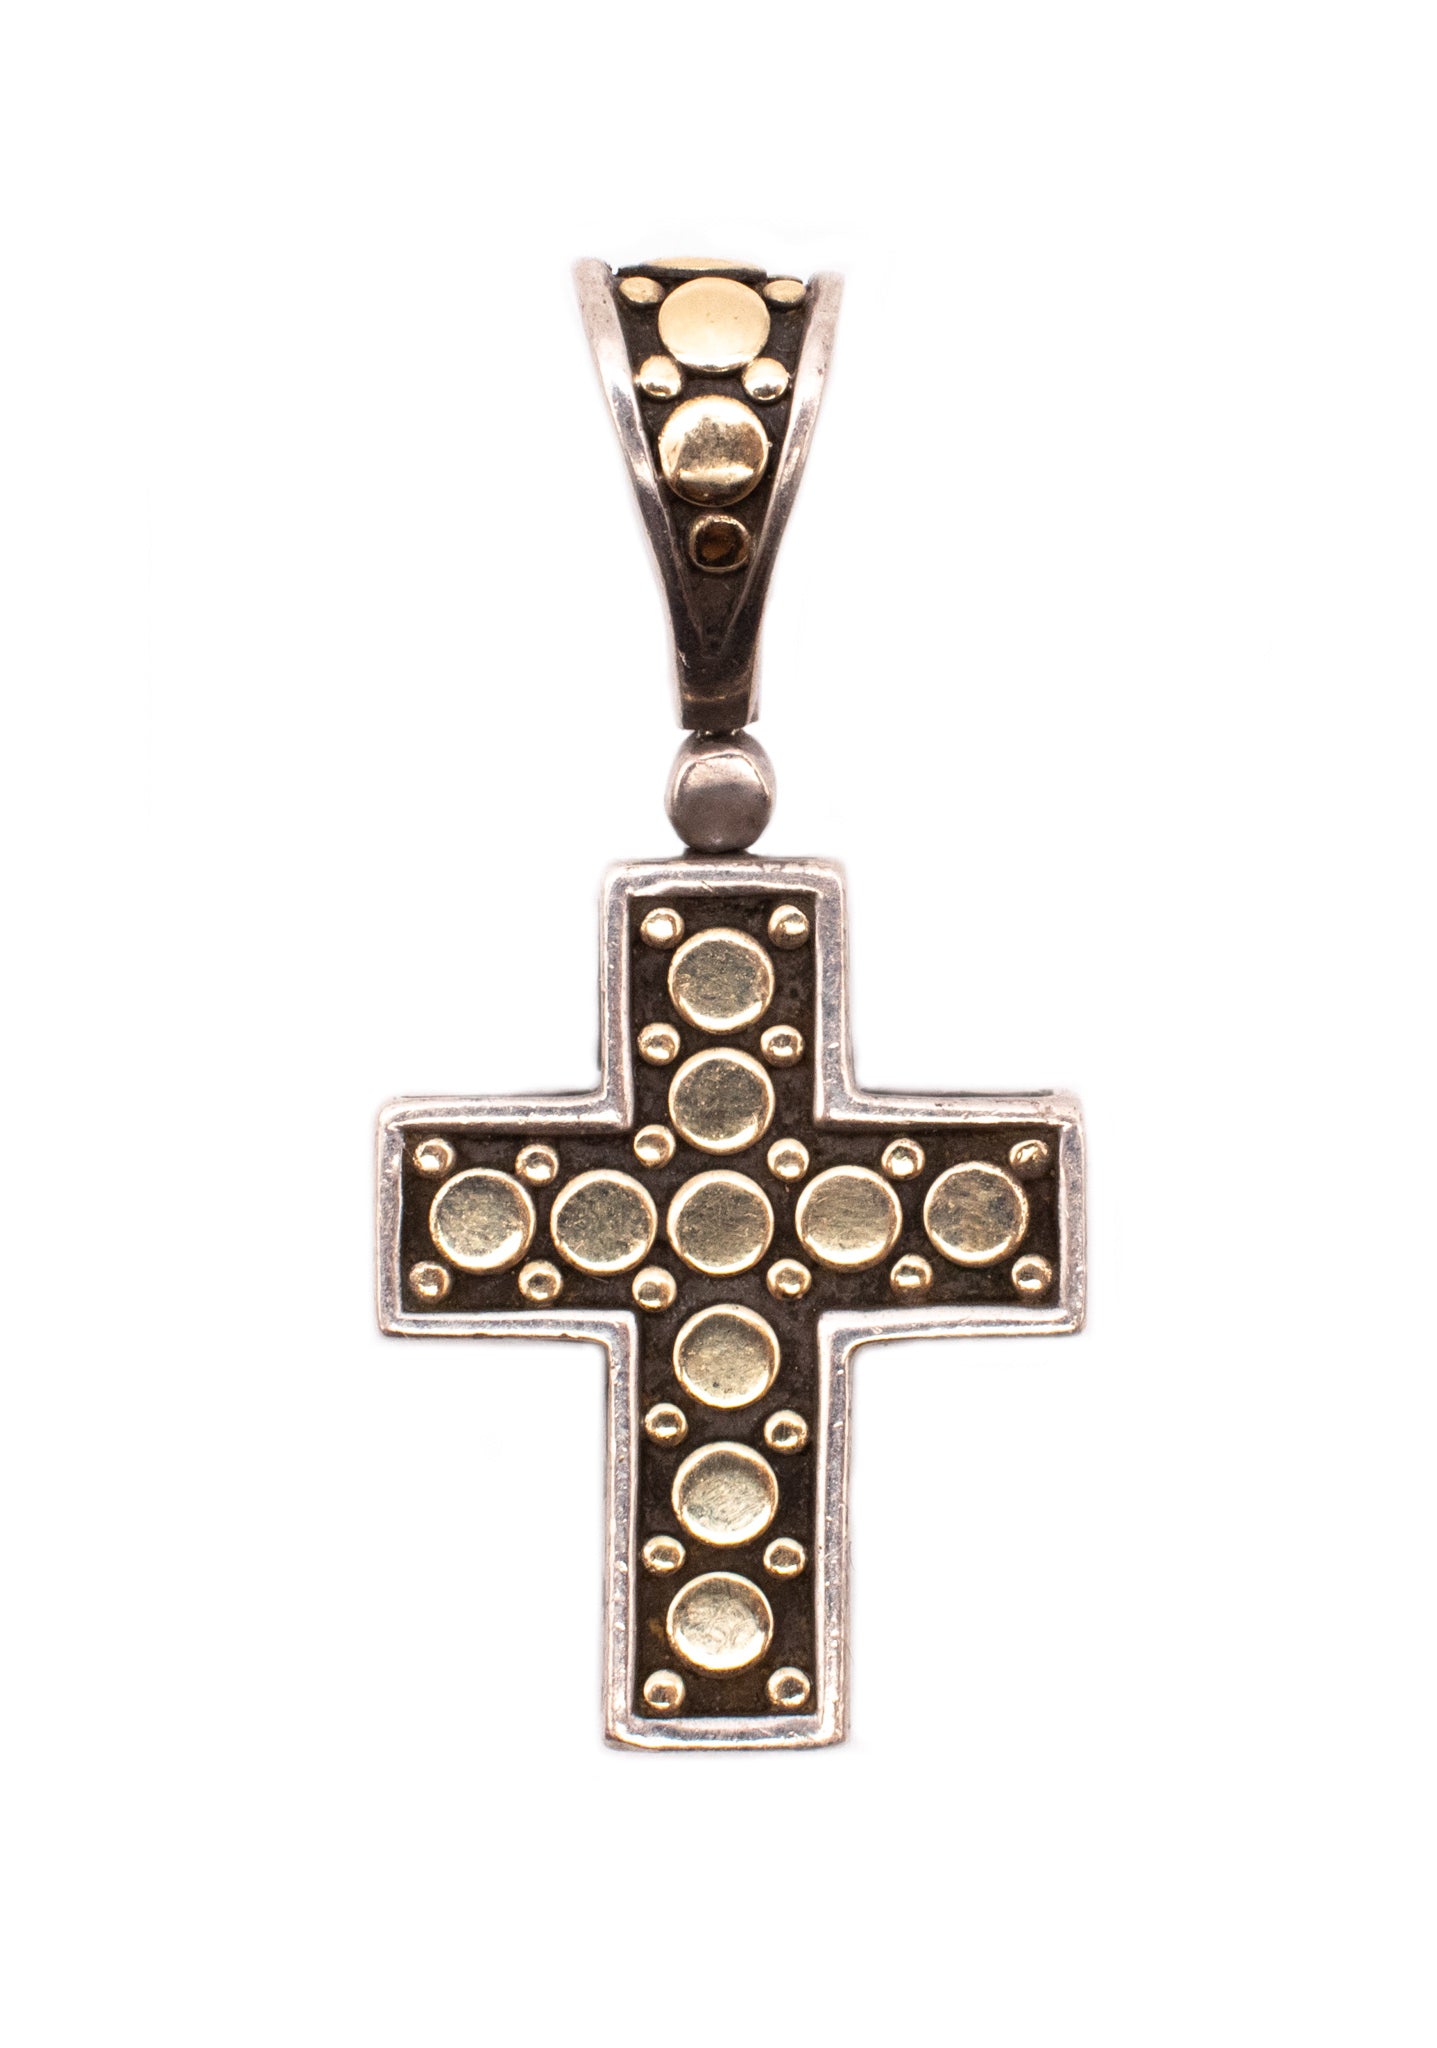 JOHN HARDY 18 KT AND STERLING SILVER DOTS CROSS